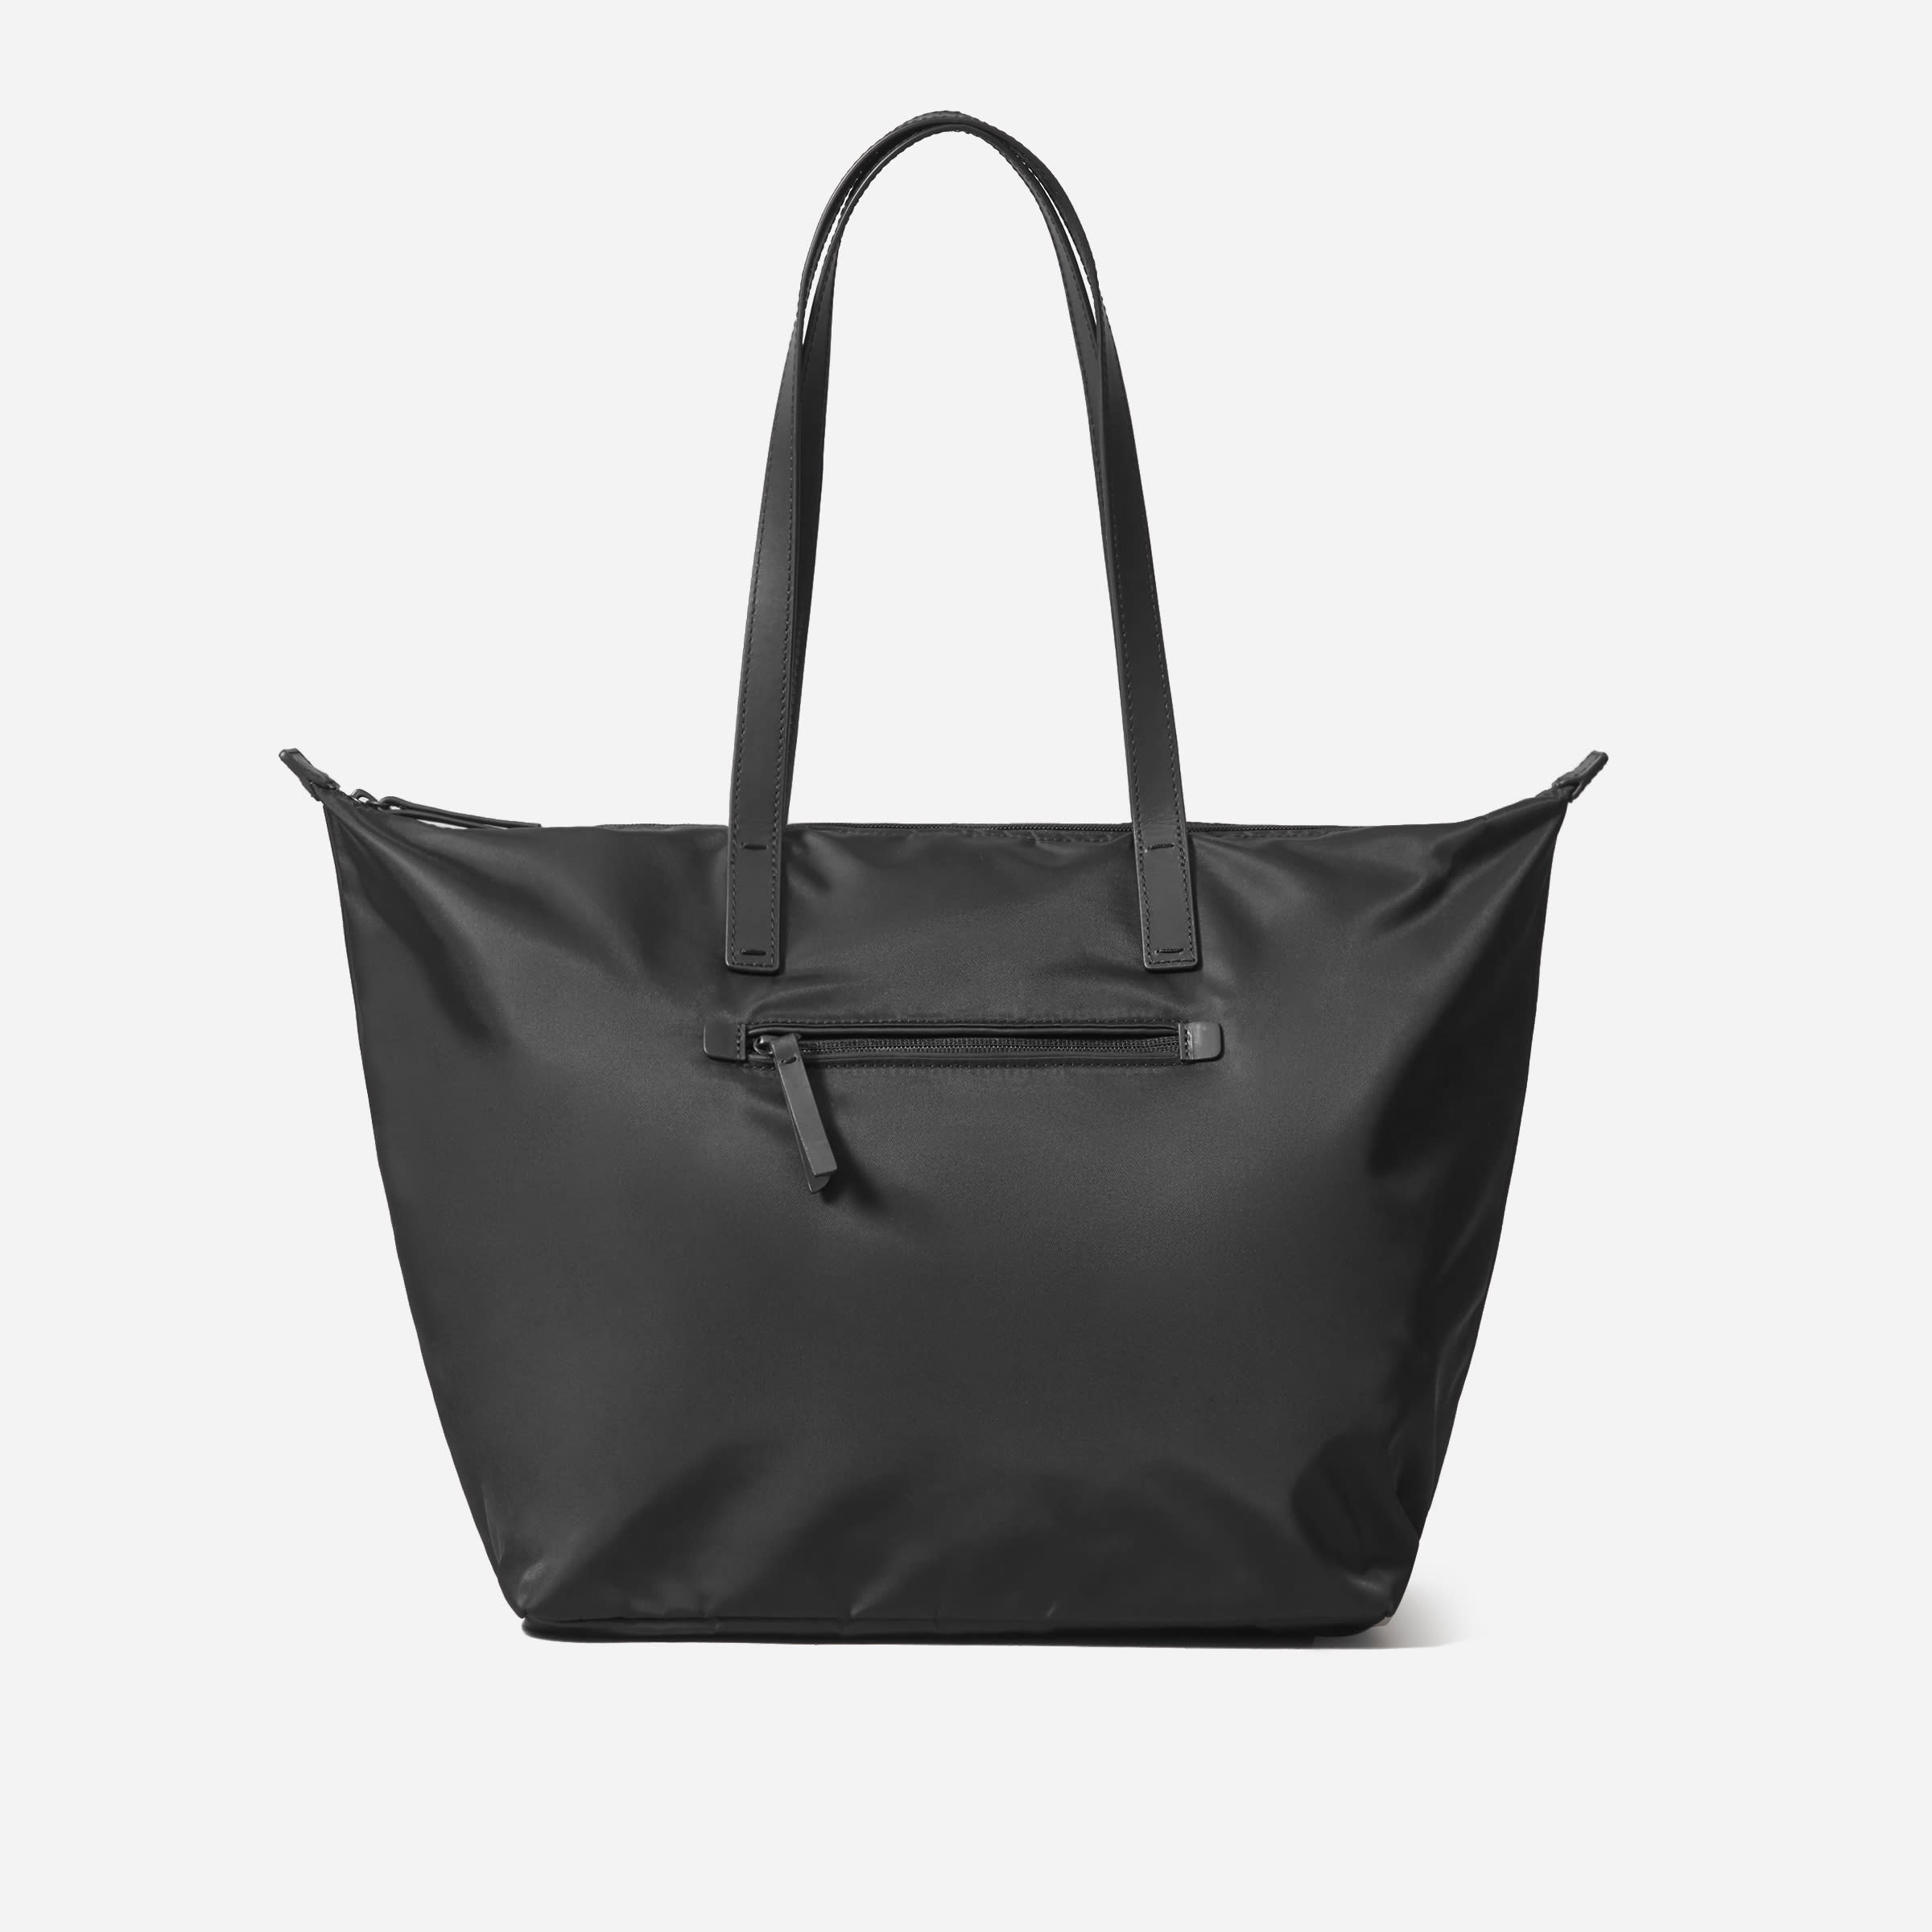 Everlane Review: ReNew Traveler Tote (c/o) and comparison to the